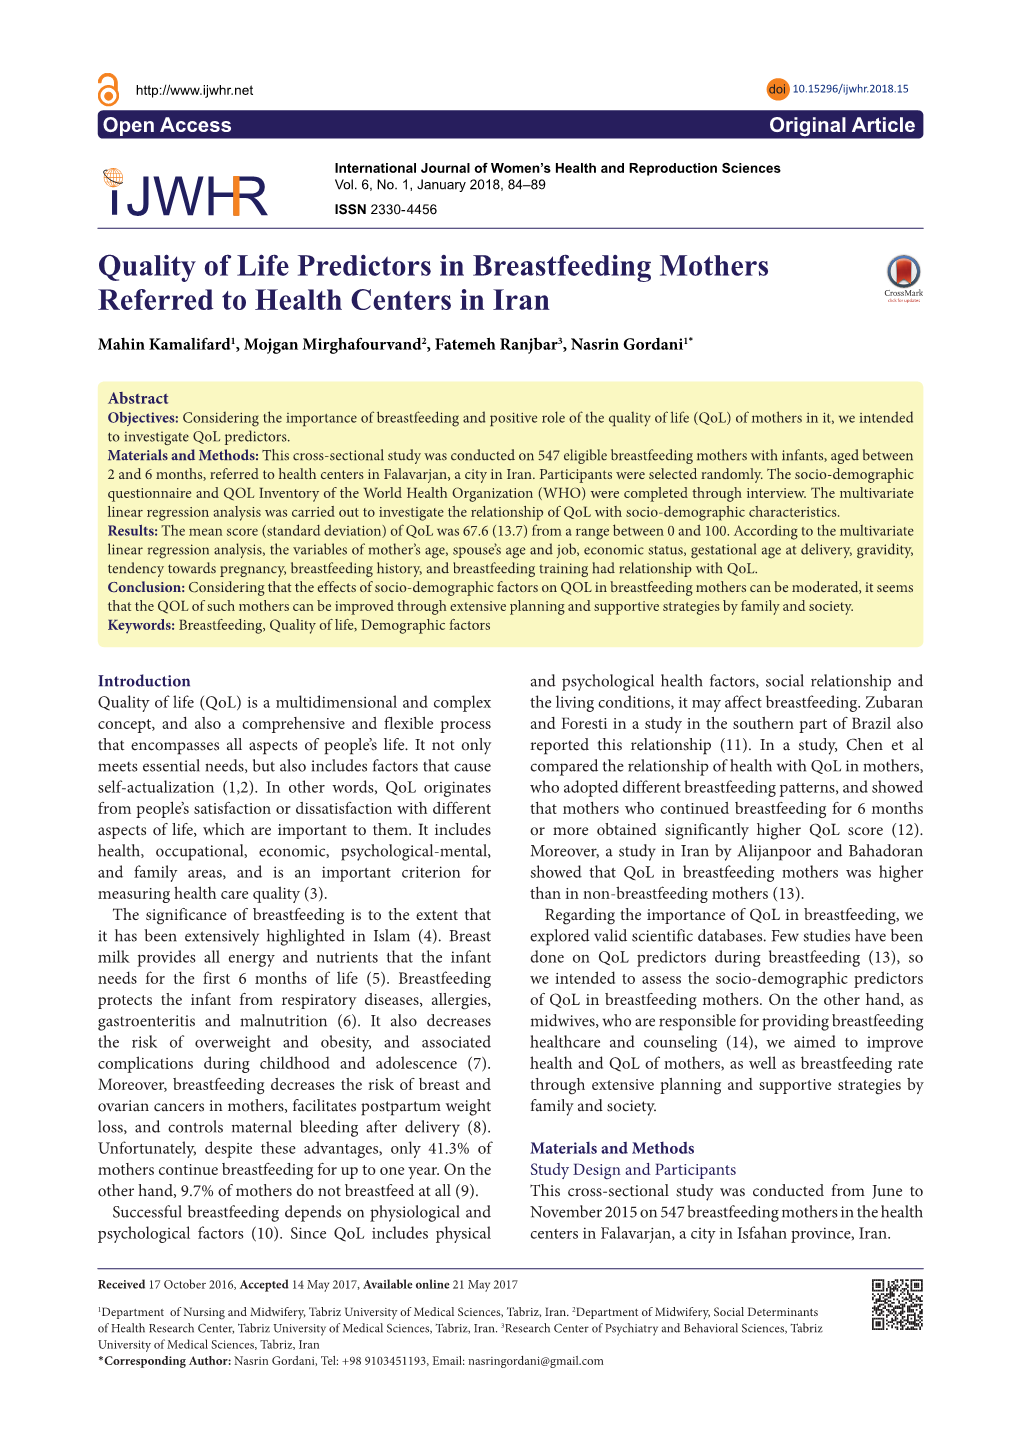 Quality of Life Predictors in Breastfeeding Mothers Referred to Health Centers in Iran